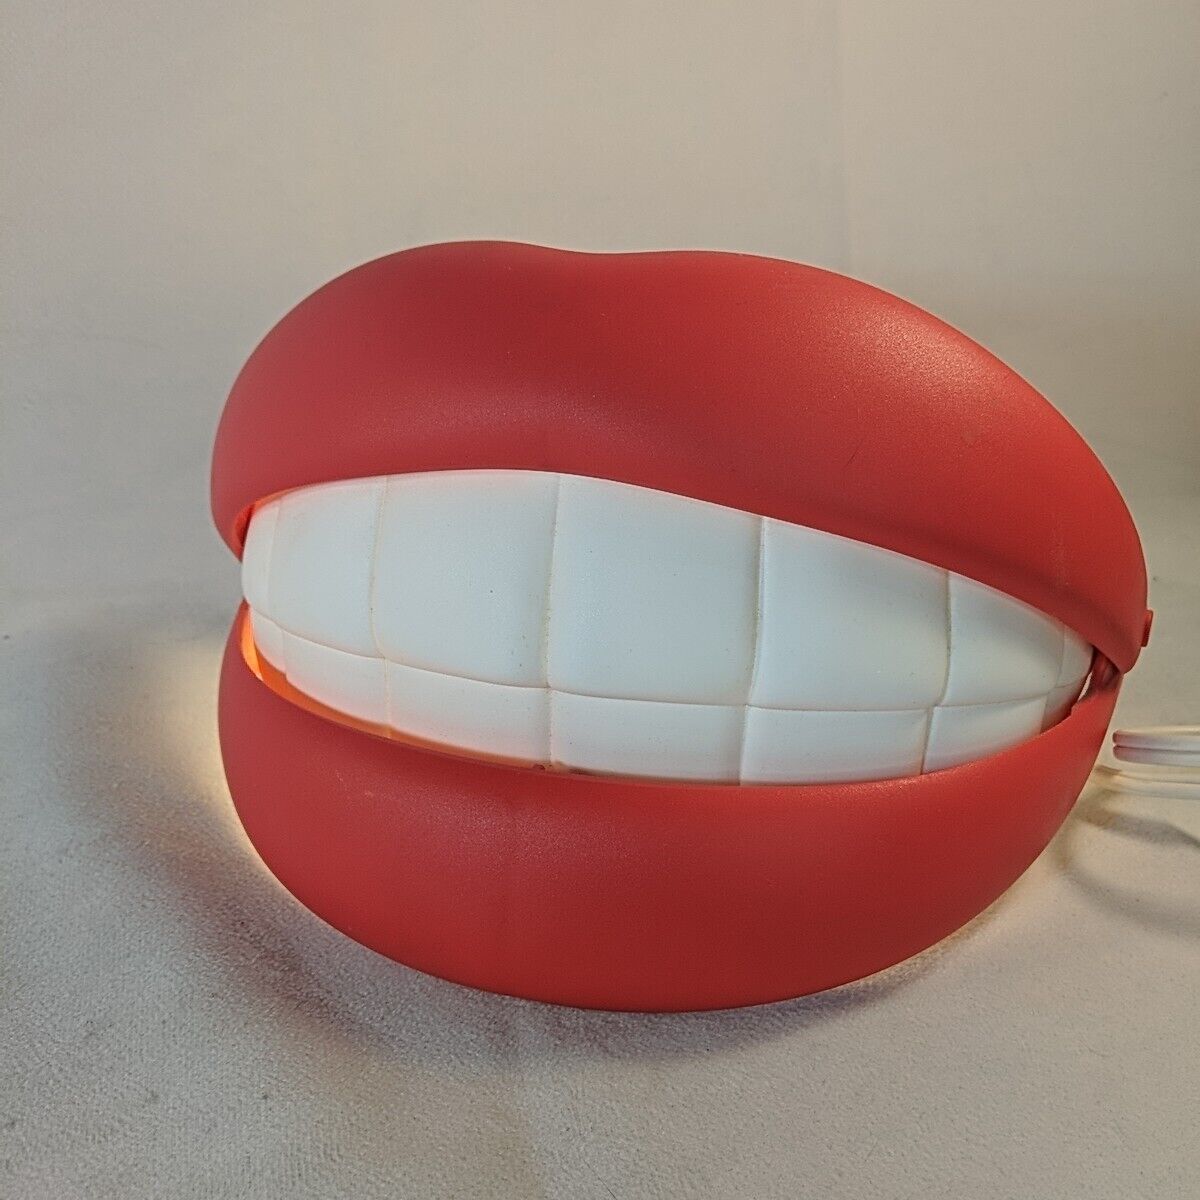 Vintage Rare IKEA Flabb Lips Mouth Teeth Light Wall Lamp Hanging WORKING Red